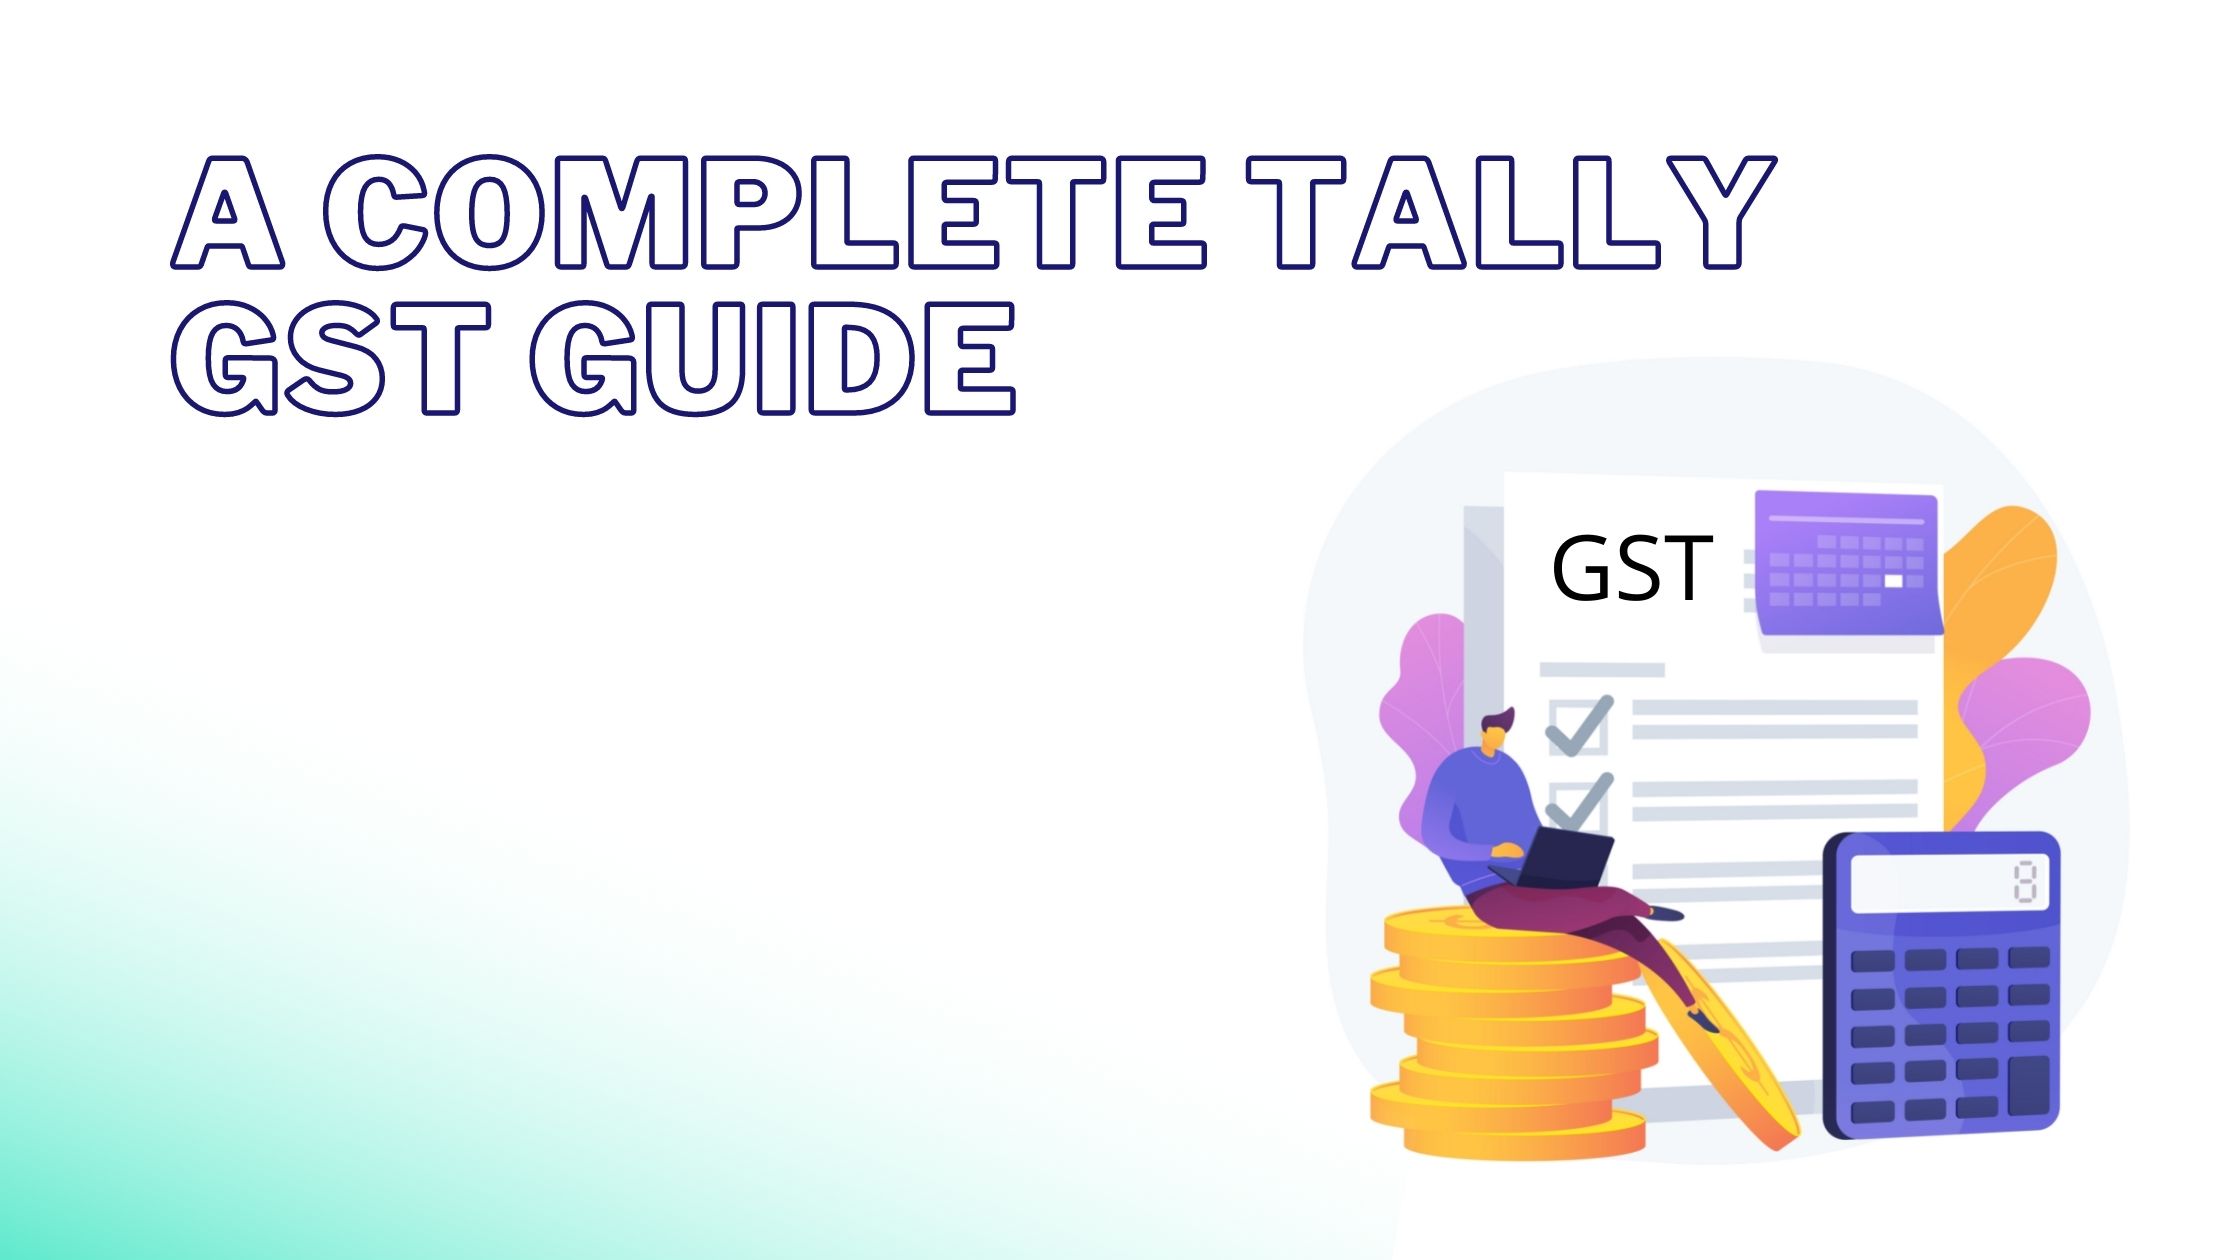 Tally gst guide